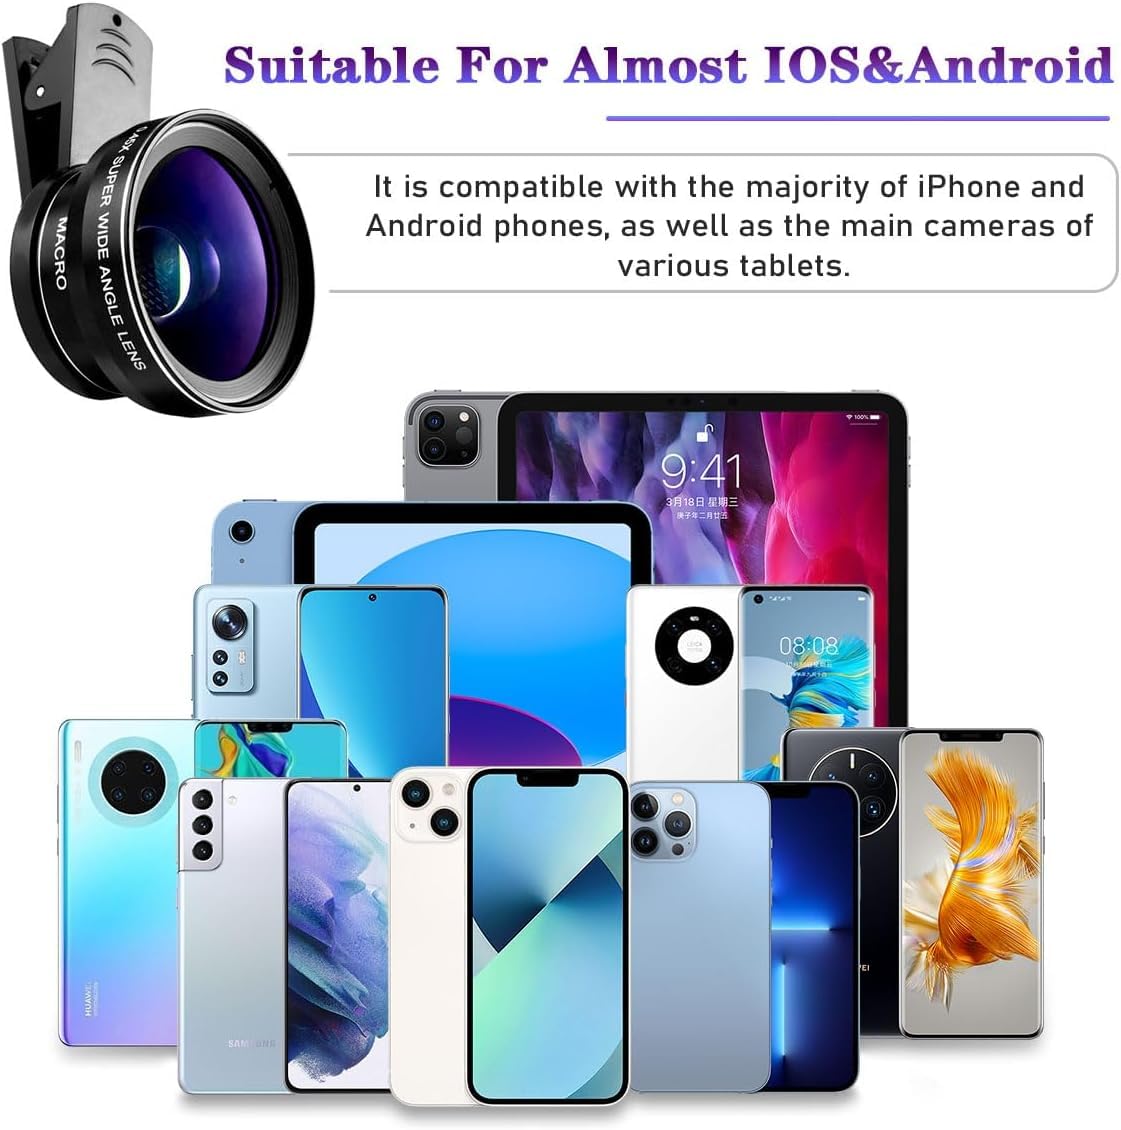 Phone Camera Lens,15x Macro Lens&0.45x Wide Angle Lens for iPhone&Android,2 in 1 Phone Lens for TIK Tok, Vlog,with Special Clip,Travel Case&Cleaning Cloth